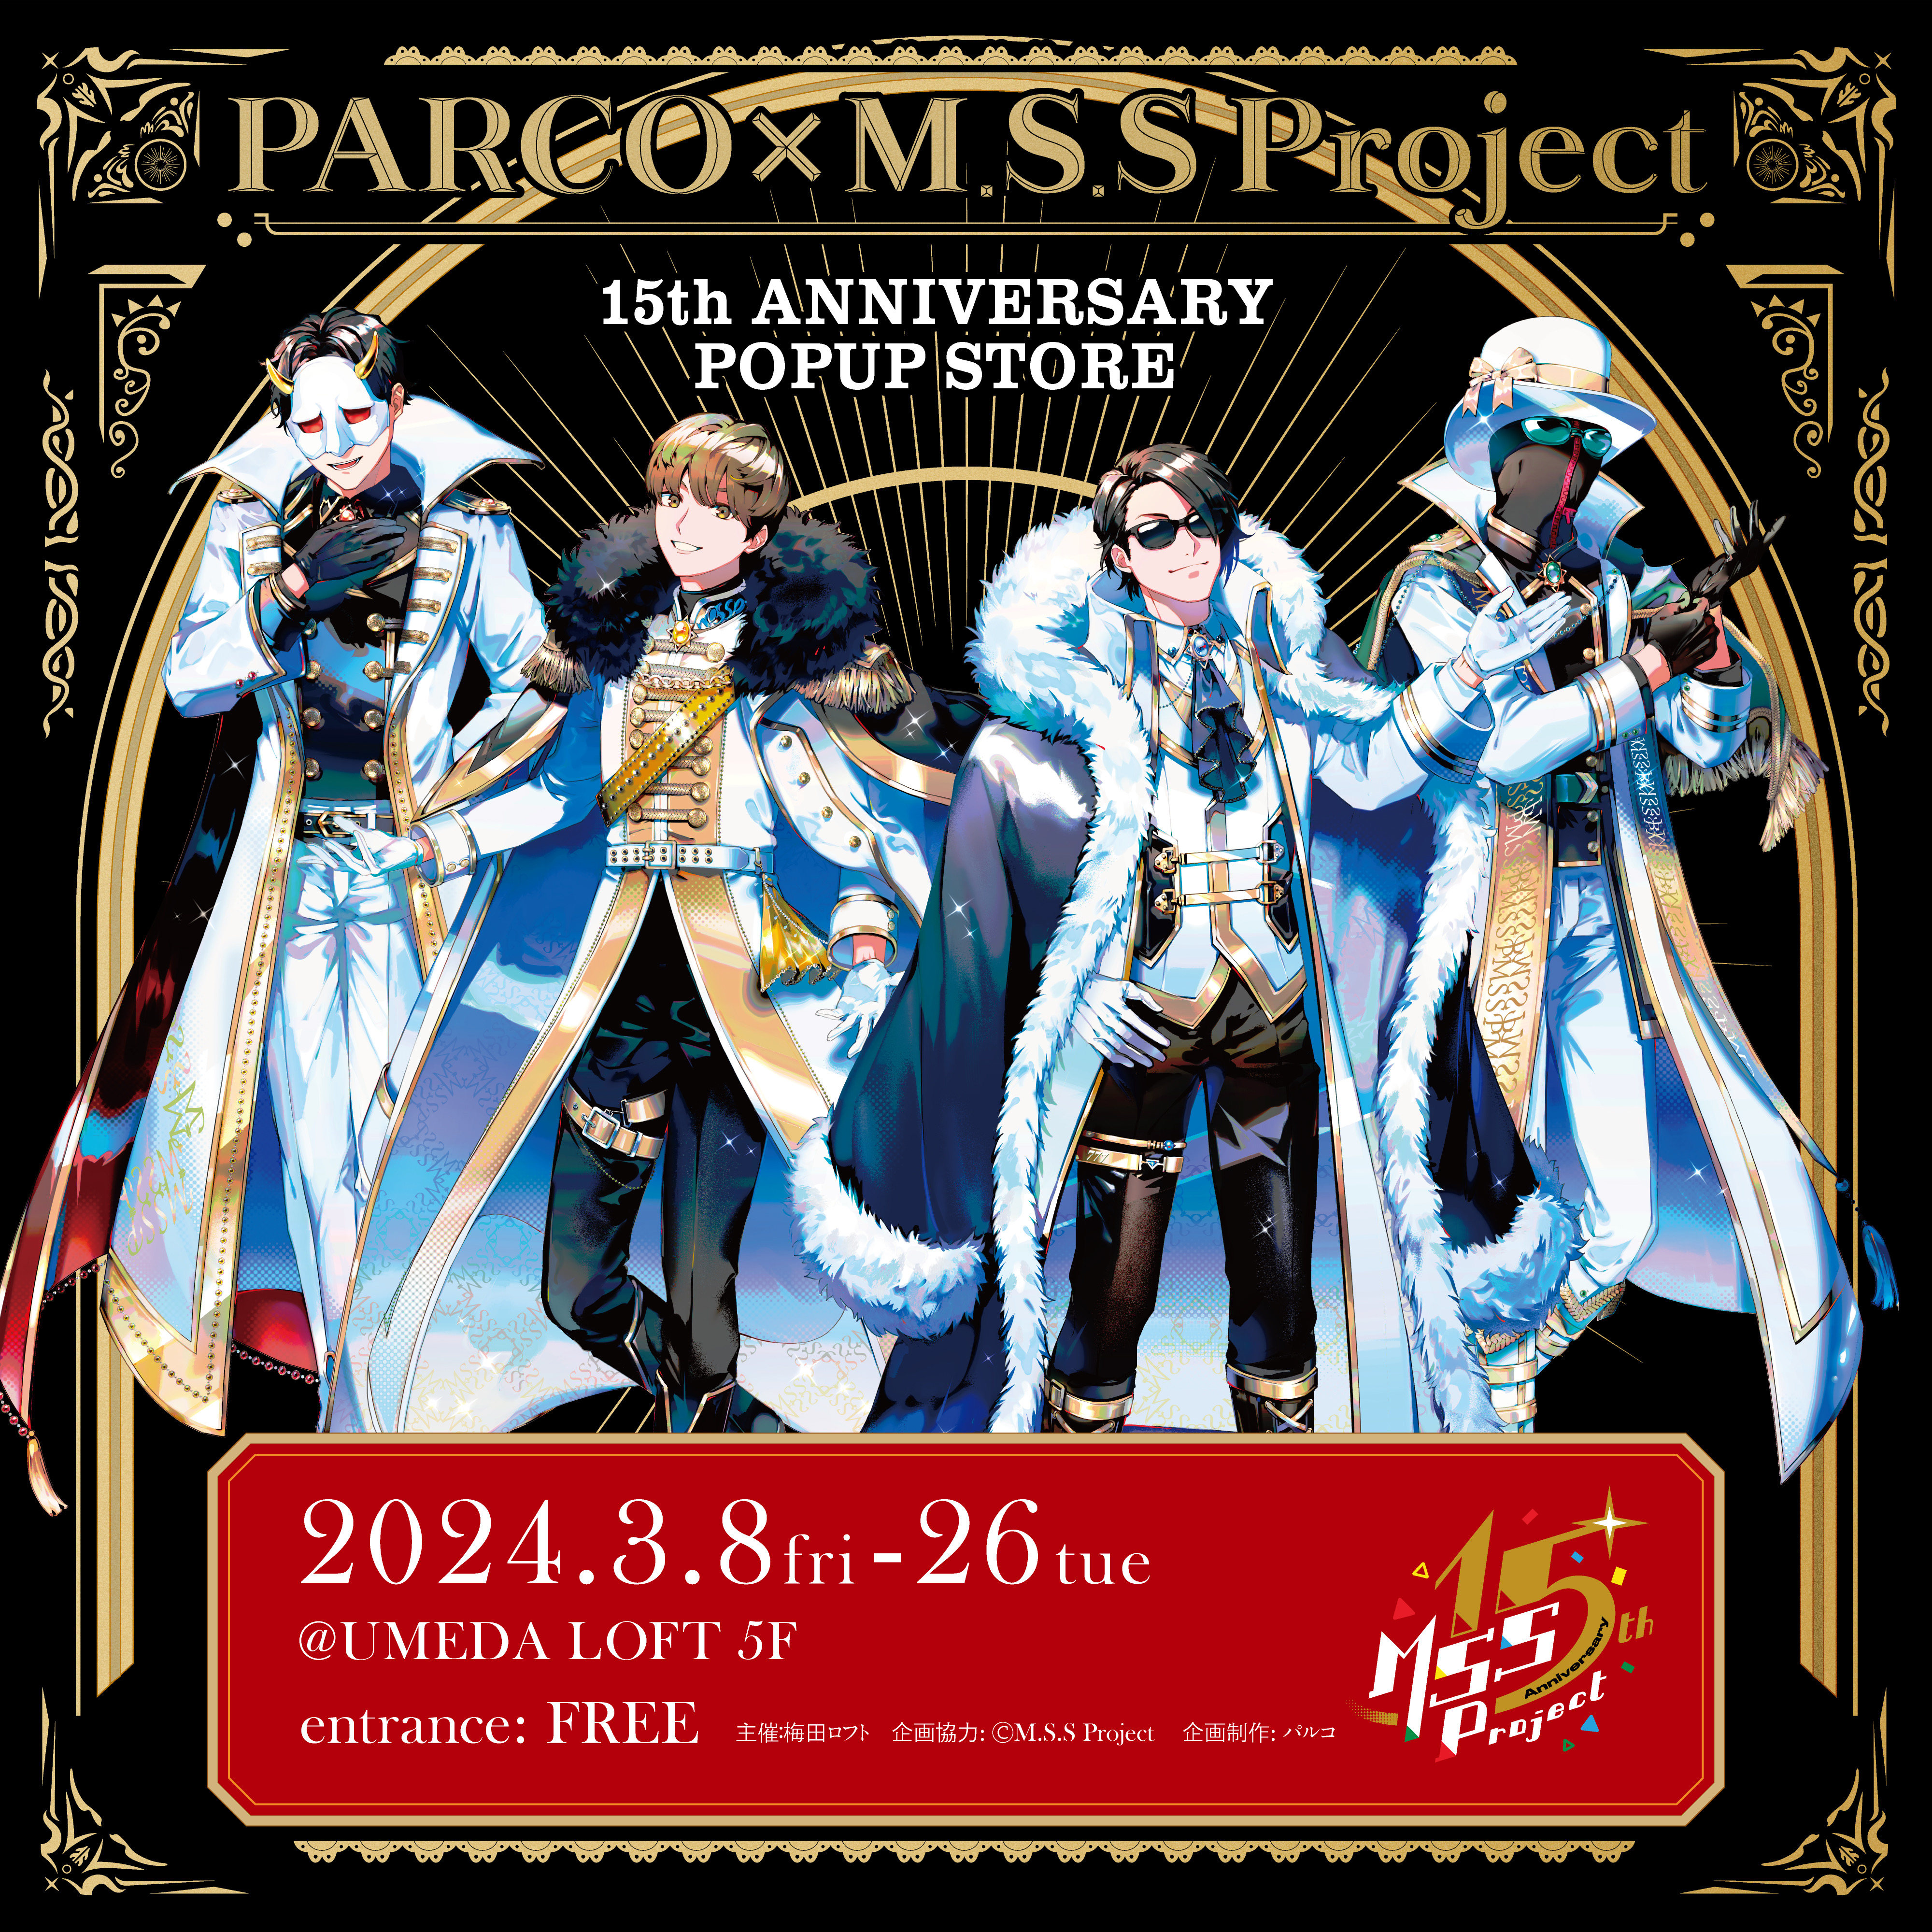 PARCO×M.S.S Project 15th ANNIVERSARY POPUP STORE 【大阪会場】の 